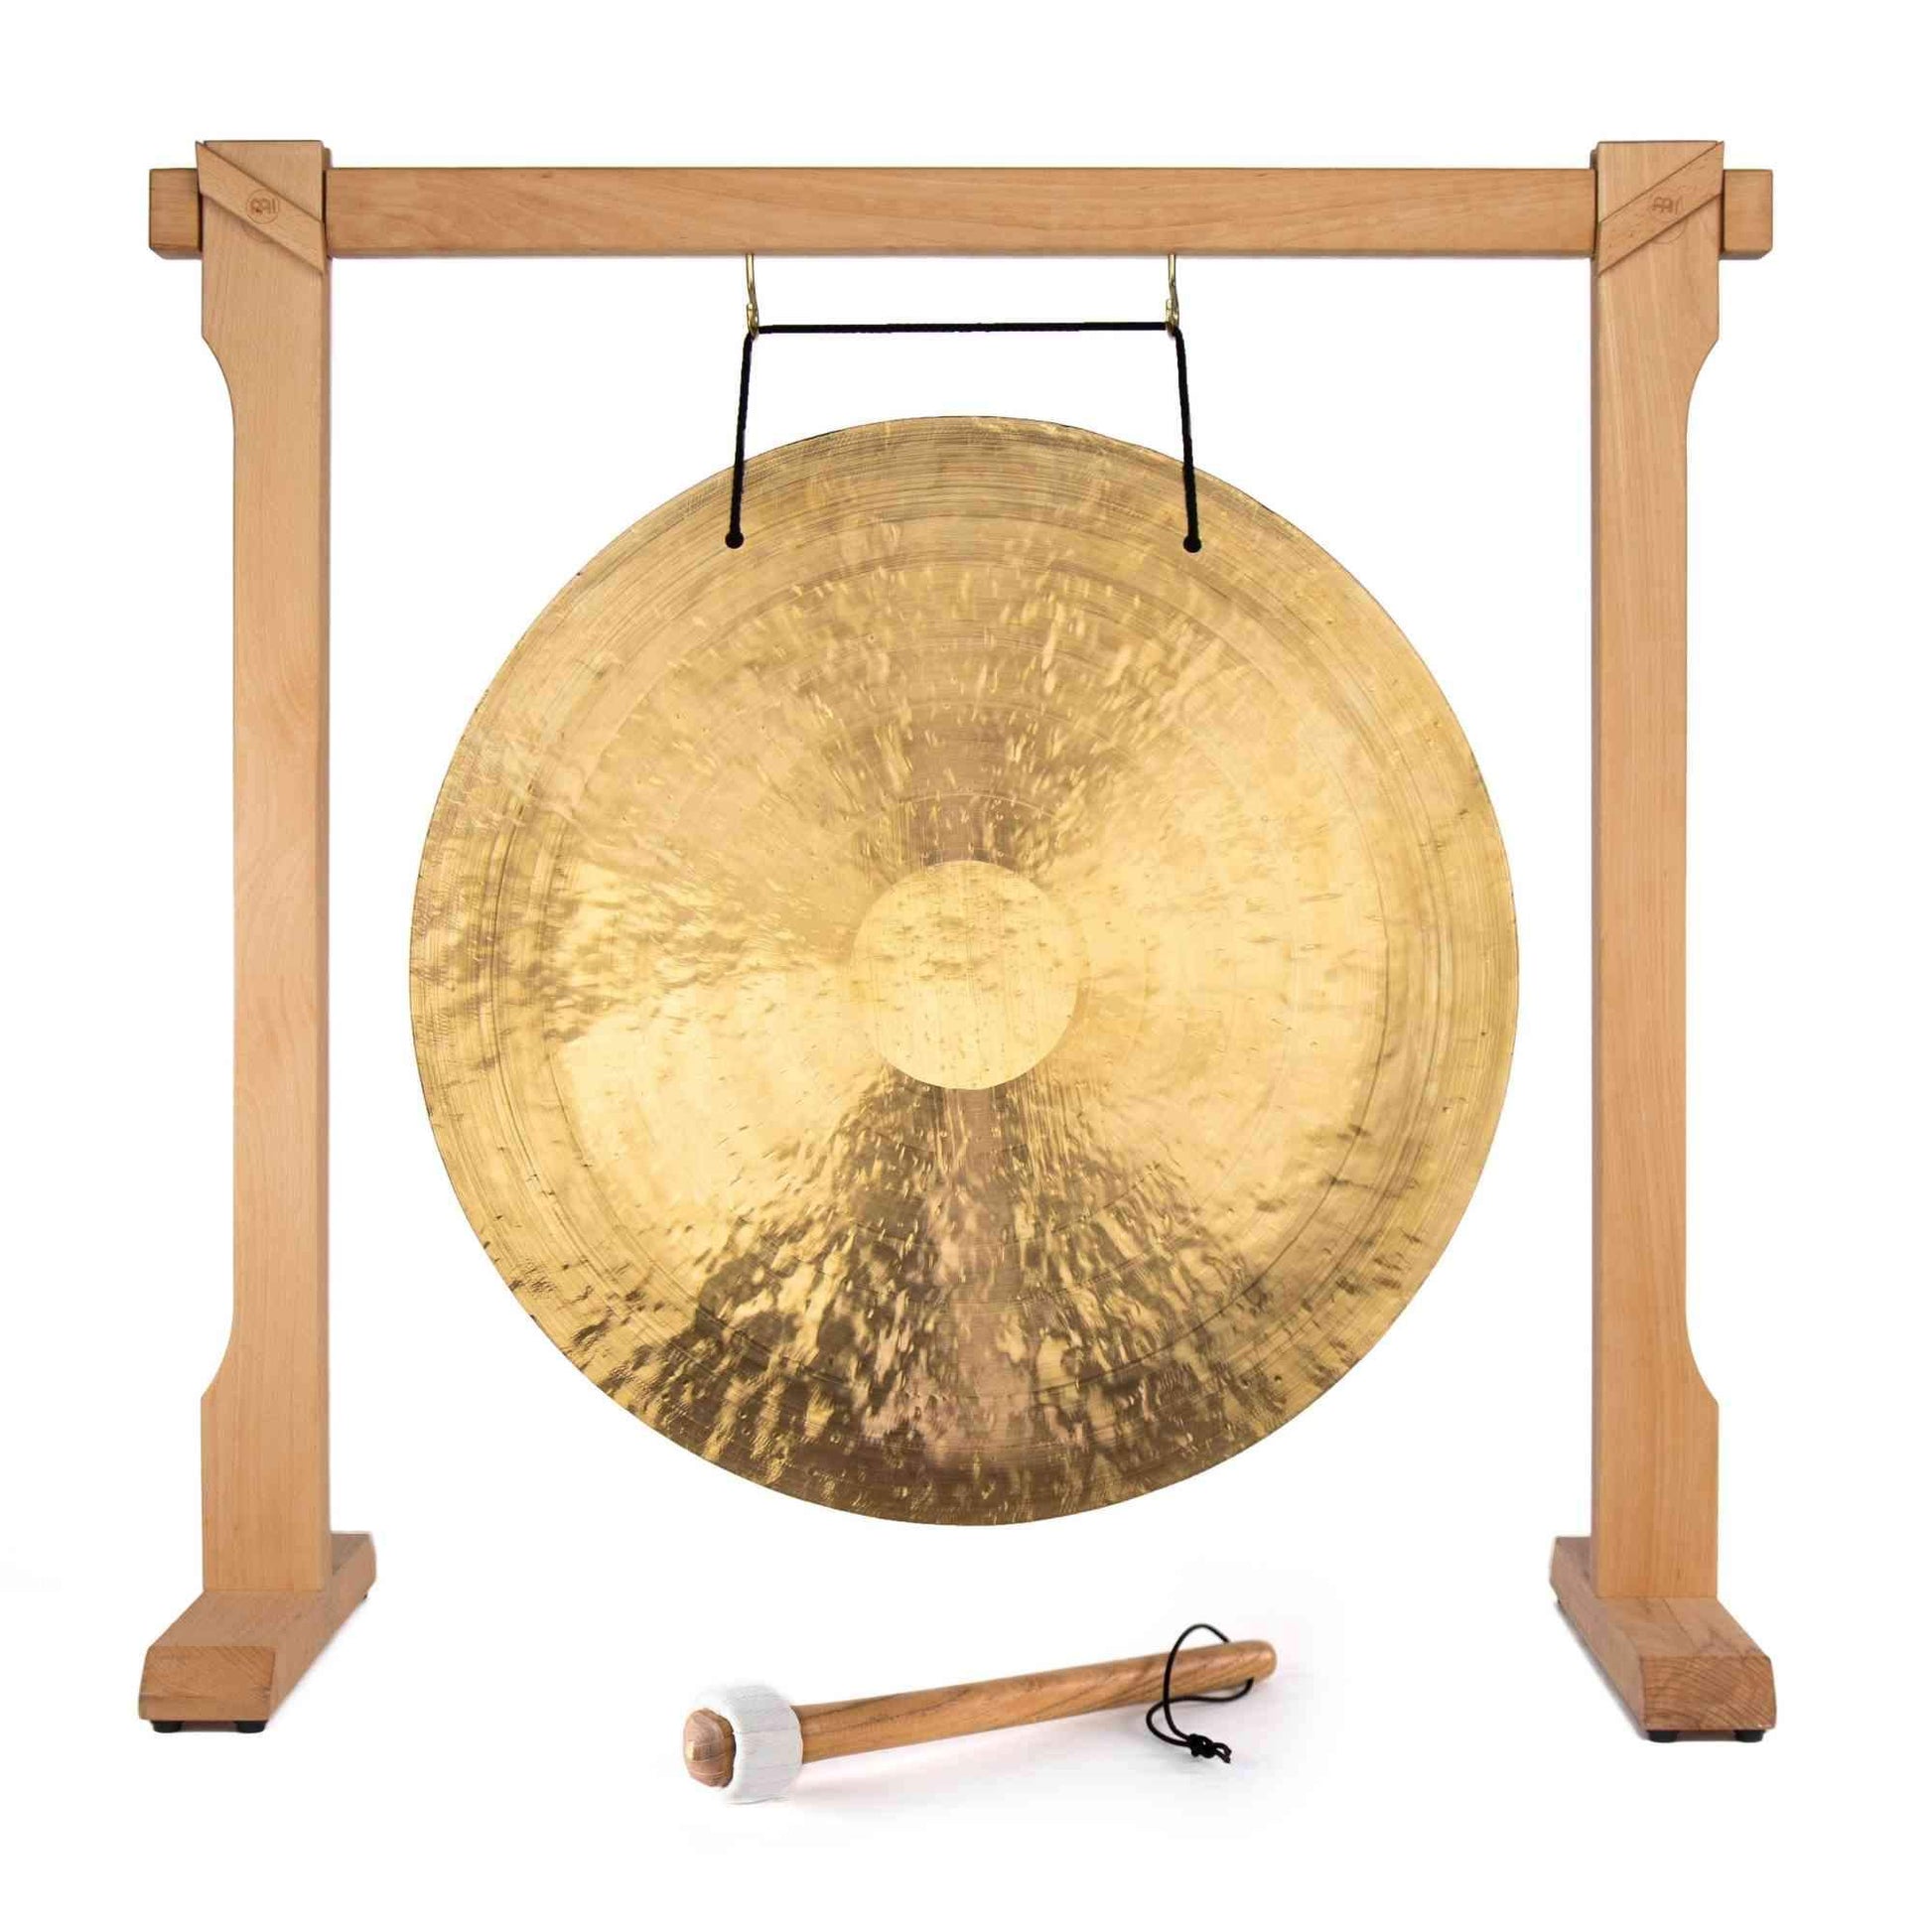 The Gong Shop Chinese Gongs with Stands 36" Chinese Wind Gong on Meinl Wooden Gong Stand with Mallet